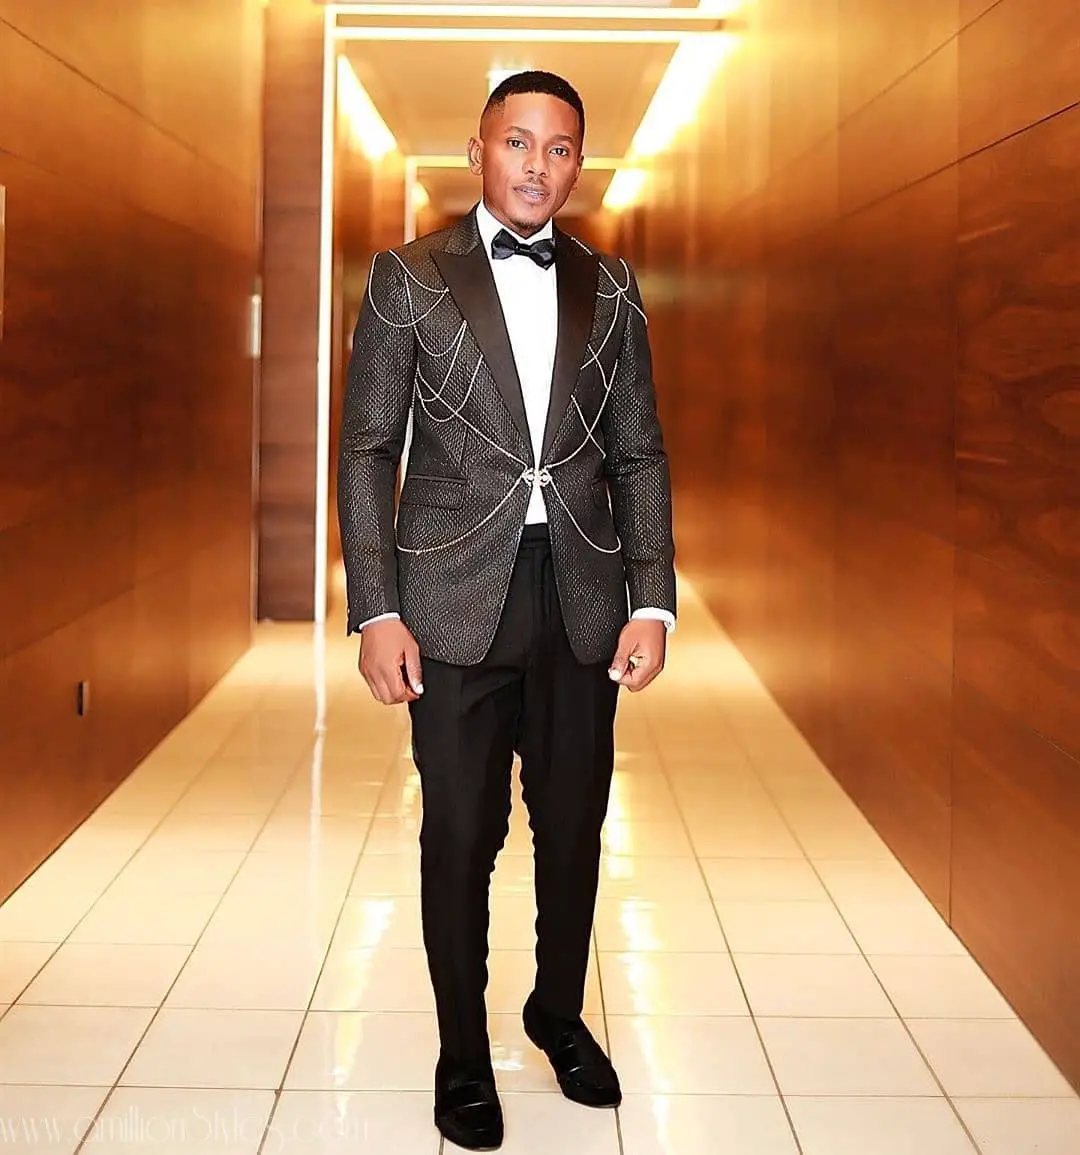 What The Men Wore To The 2020 AMVCA